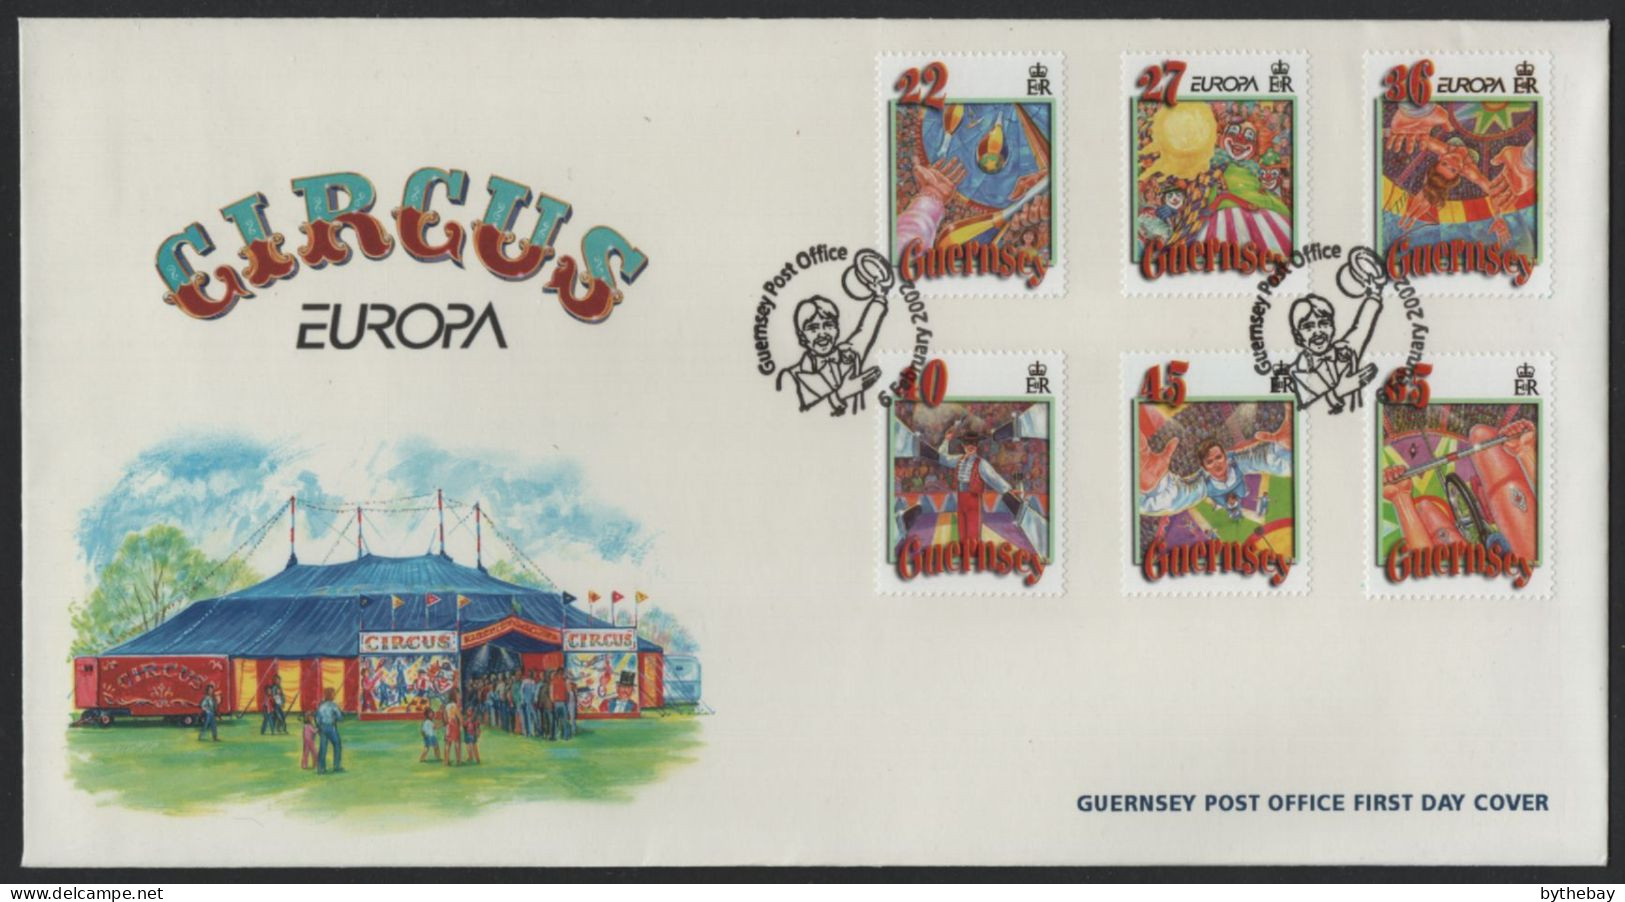 Guernsey 2002 FDC Sc 756-761 Circus Performers EUROPA - Guernesey